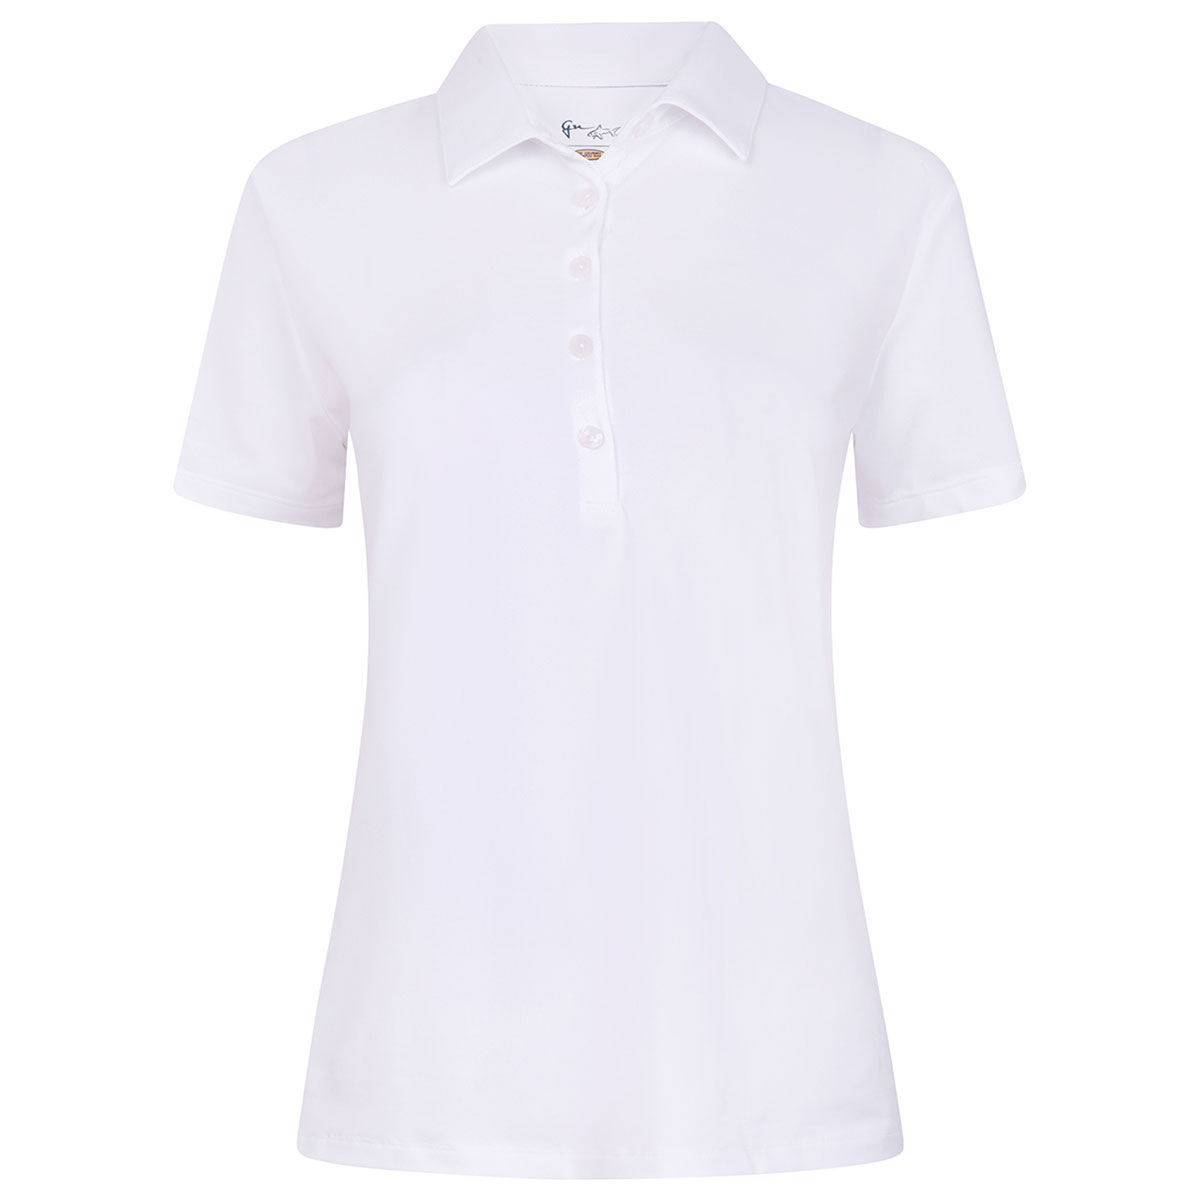 Greg Norman White Embroidered Freedom Pique Golf Polo Shirt, Womens | American Golf, Size: Medium - Father's Day Gift von Greg Norman